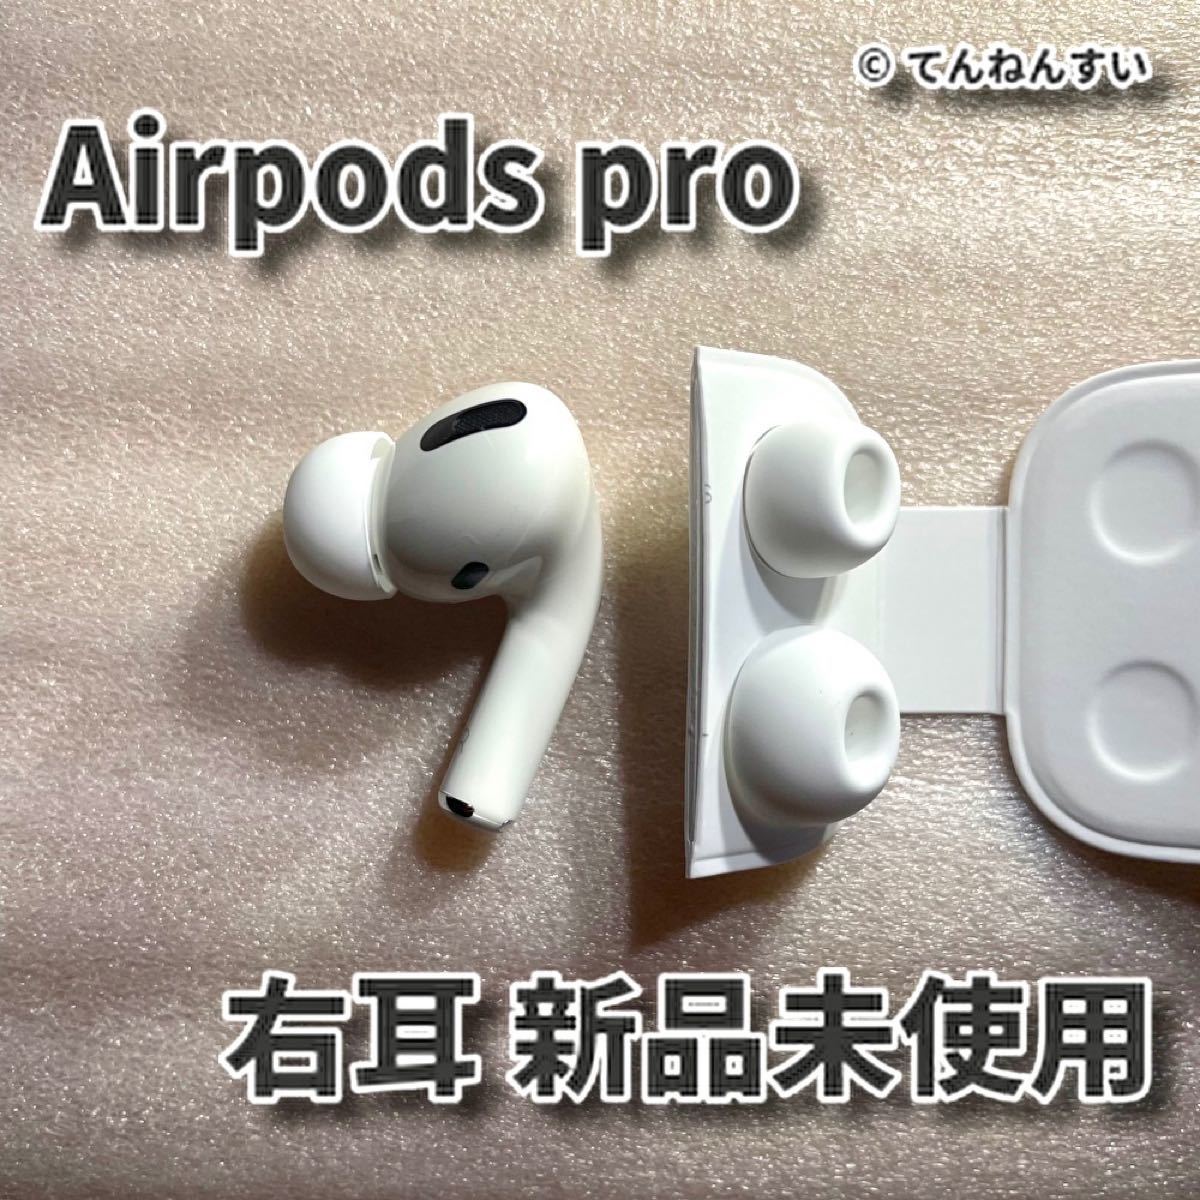 AirPods Pro 第二世代 イヤホン 片耳 左耳のみ